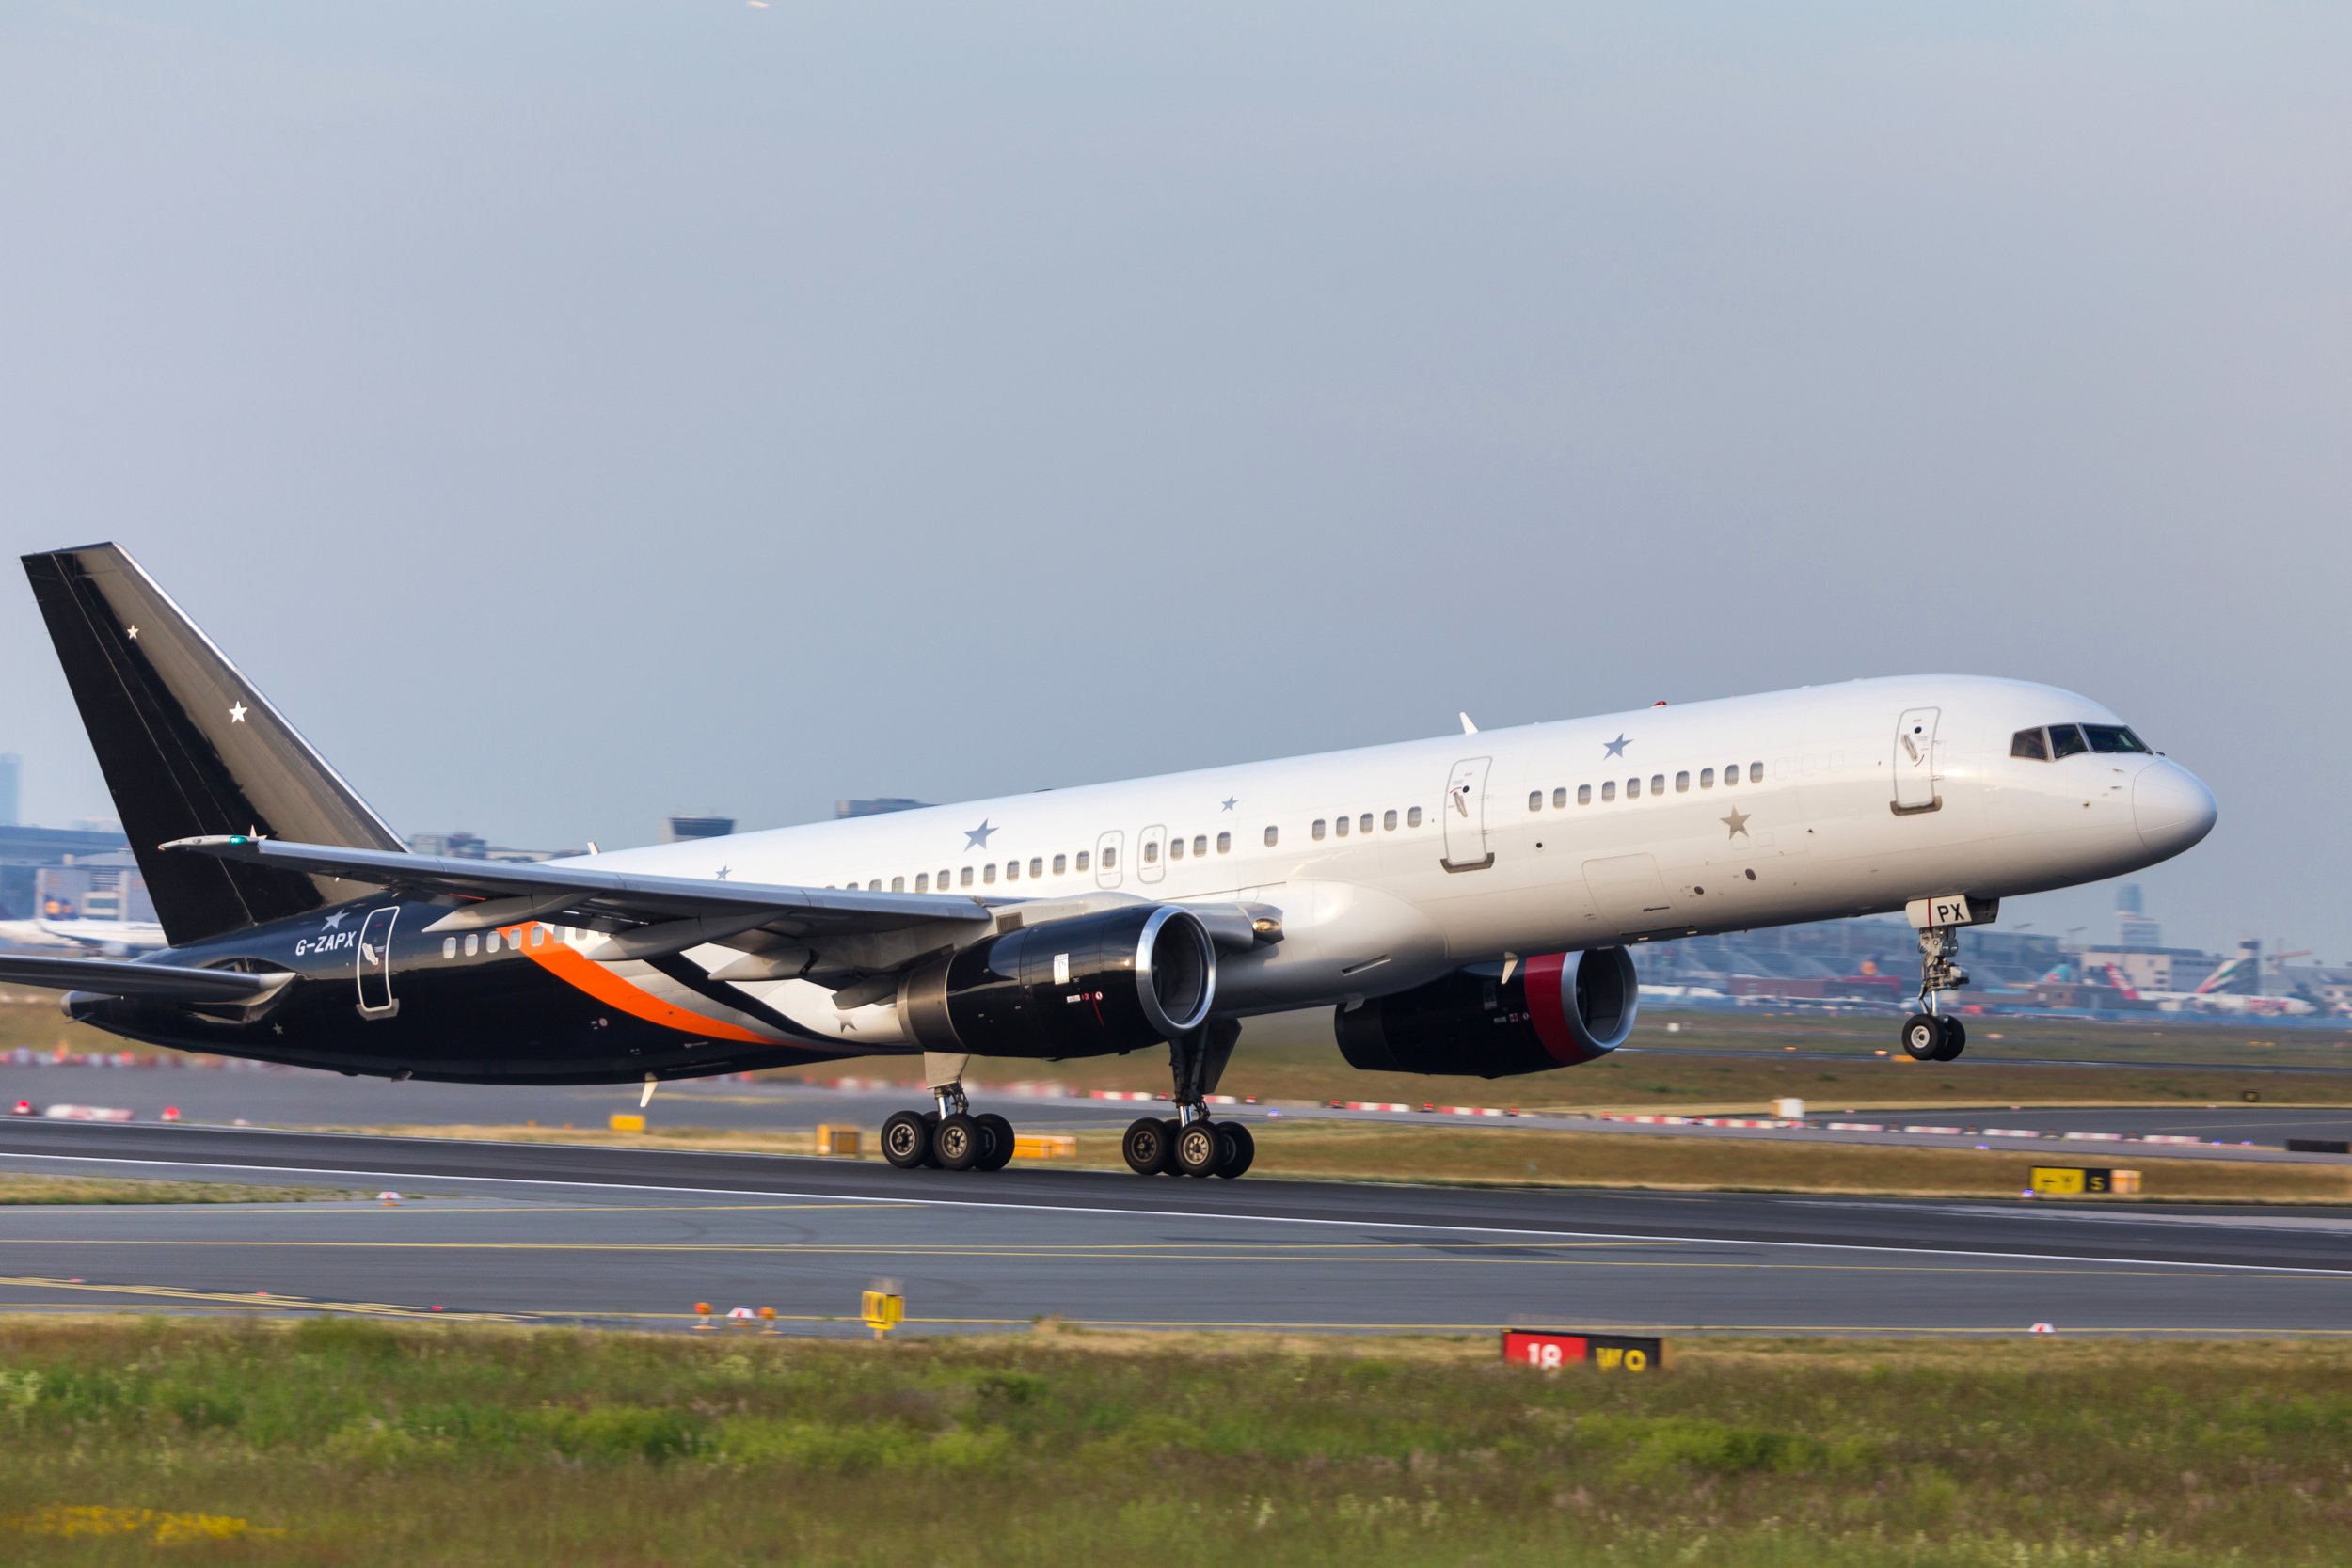 Miles Aviation delivers ‘year-round’ Deicing support for Titan Airways